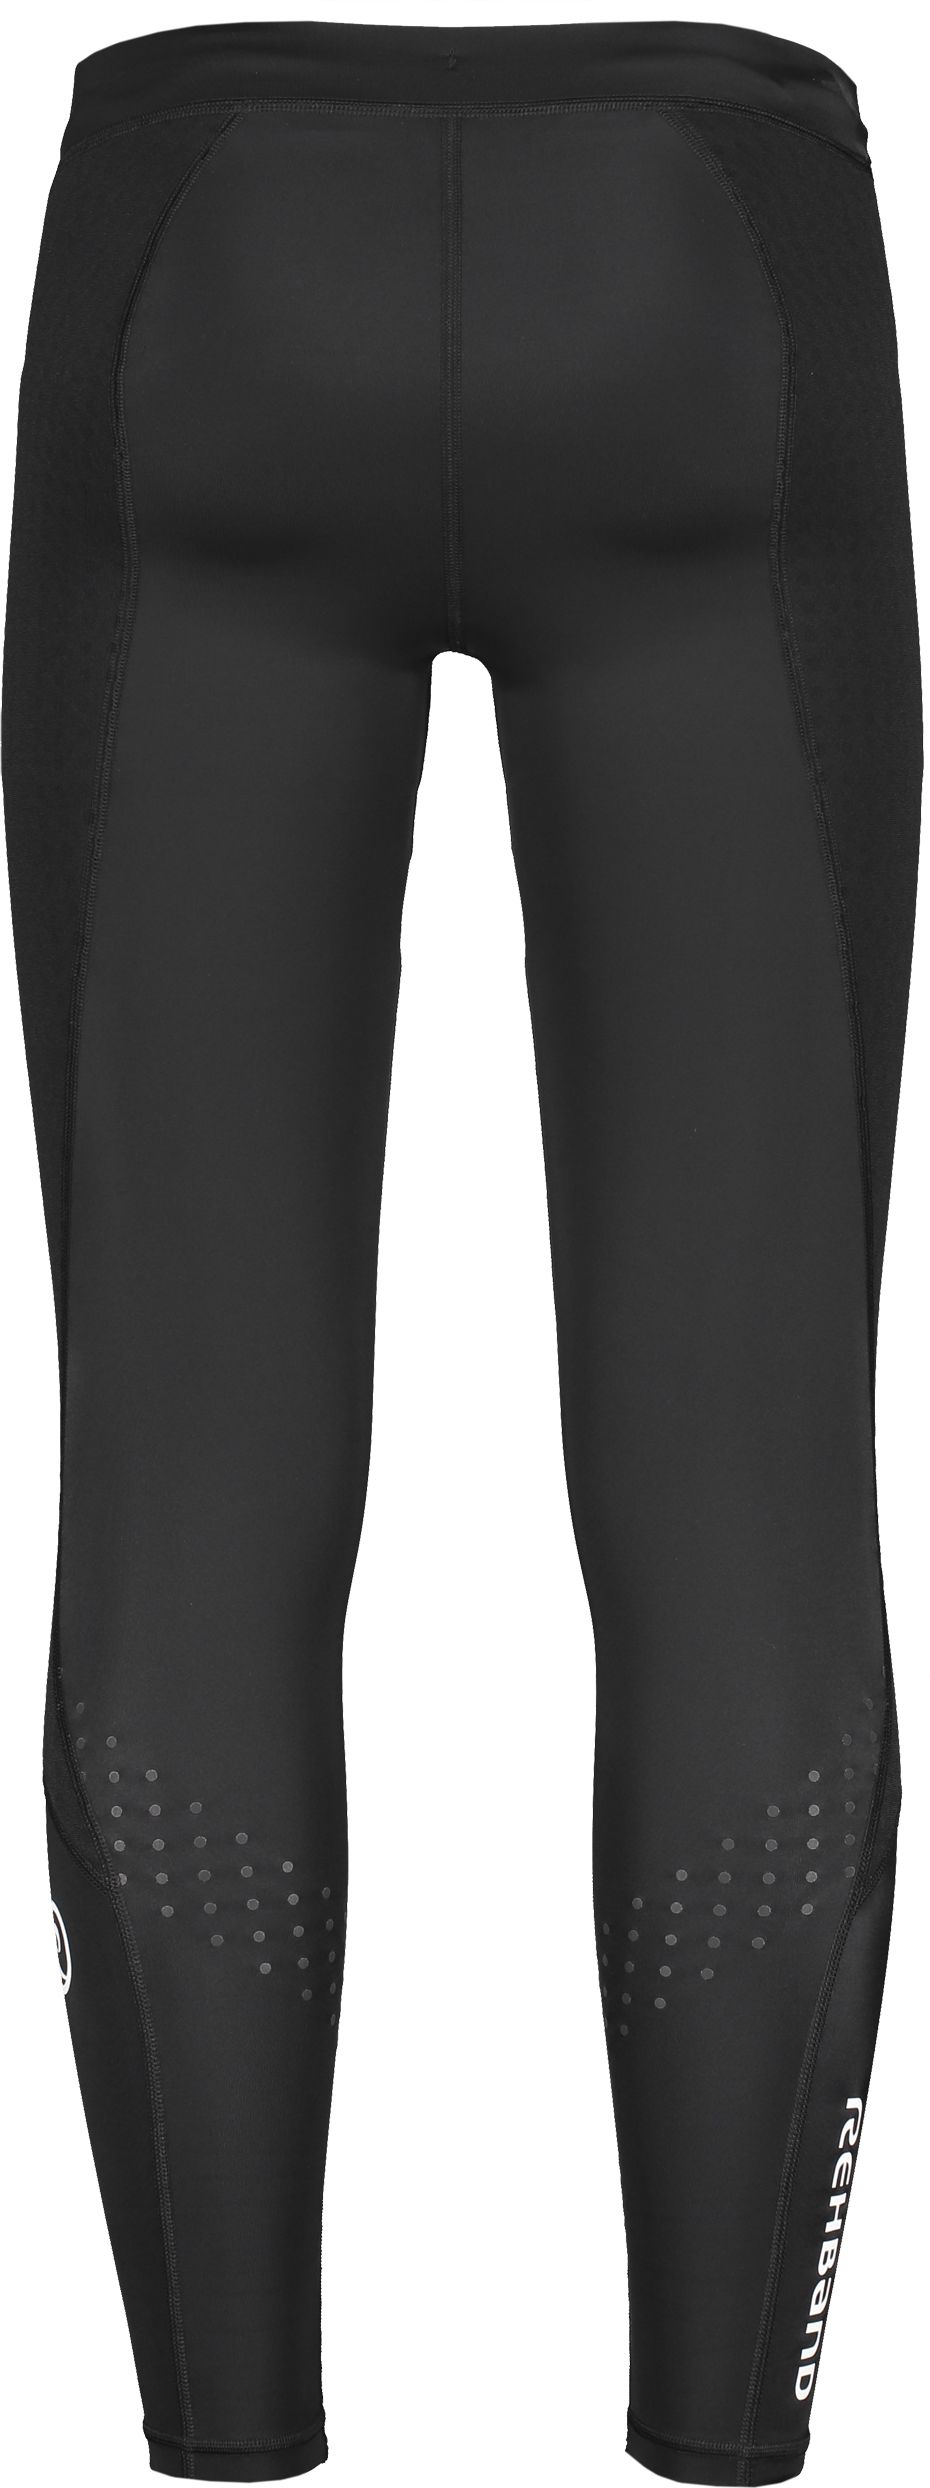 REHBAND, UD RUNNERS KNEE ITBS TIGHTS